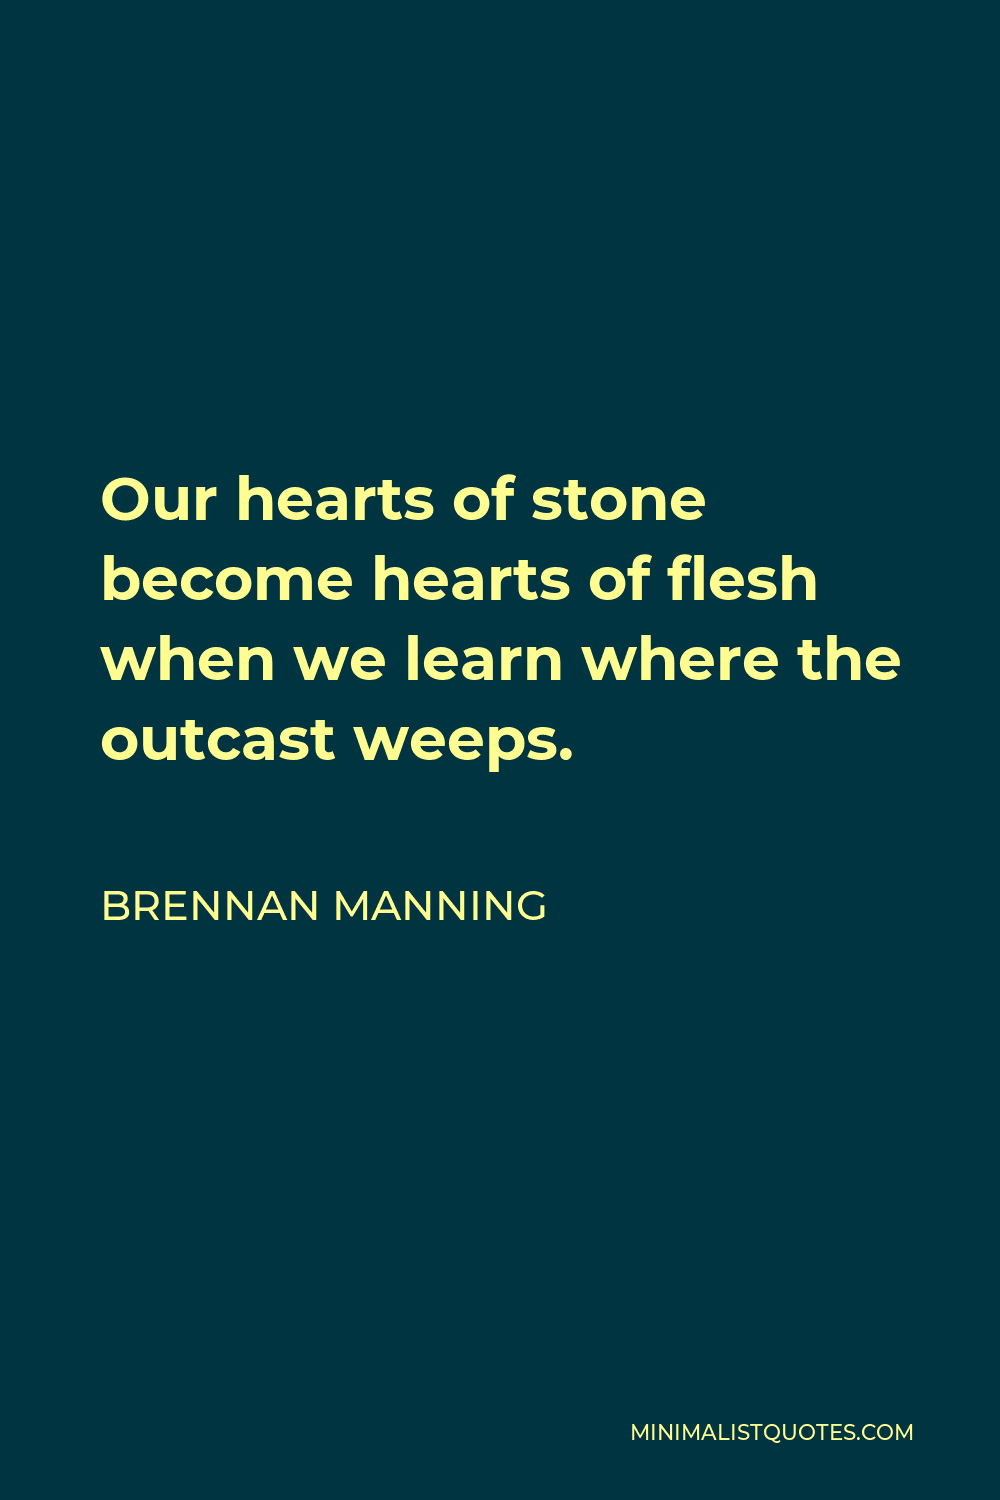 Brennan Manning Quote - Our hearts of stone become hearts of flesh when we learn where the outcast weeps.